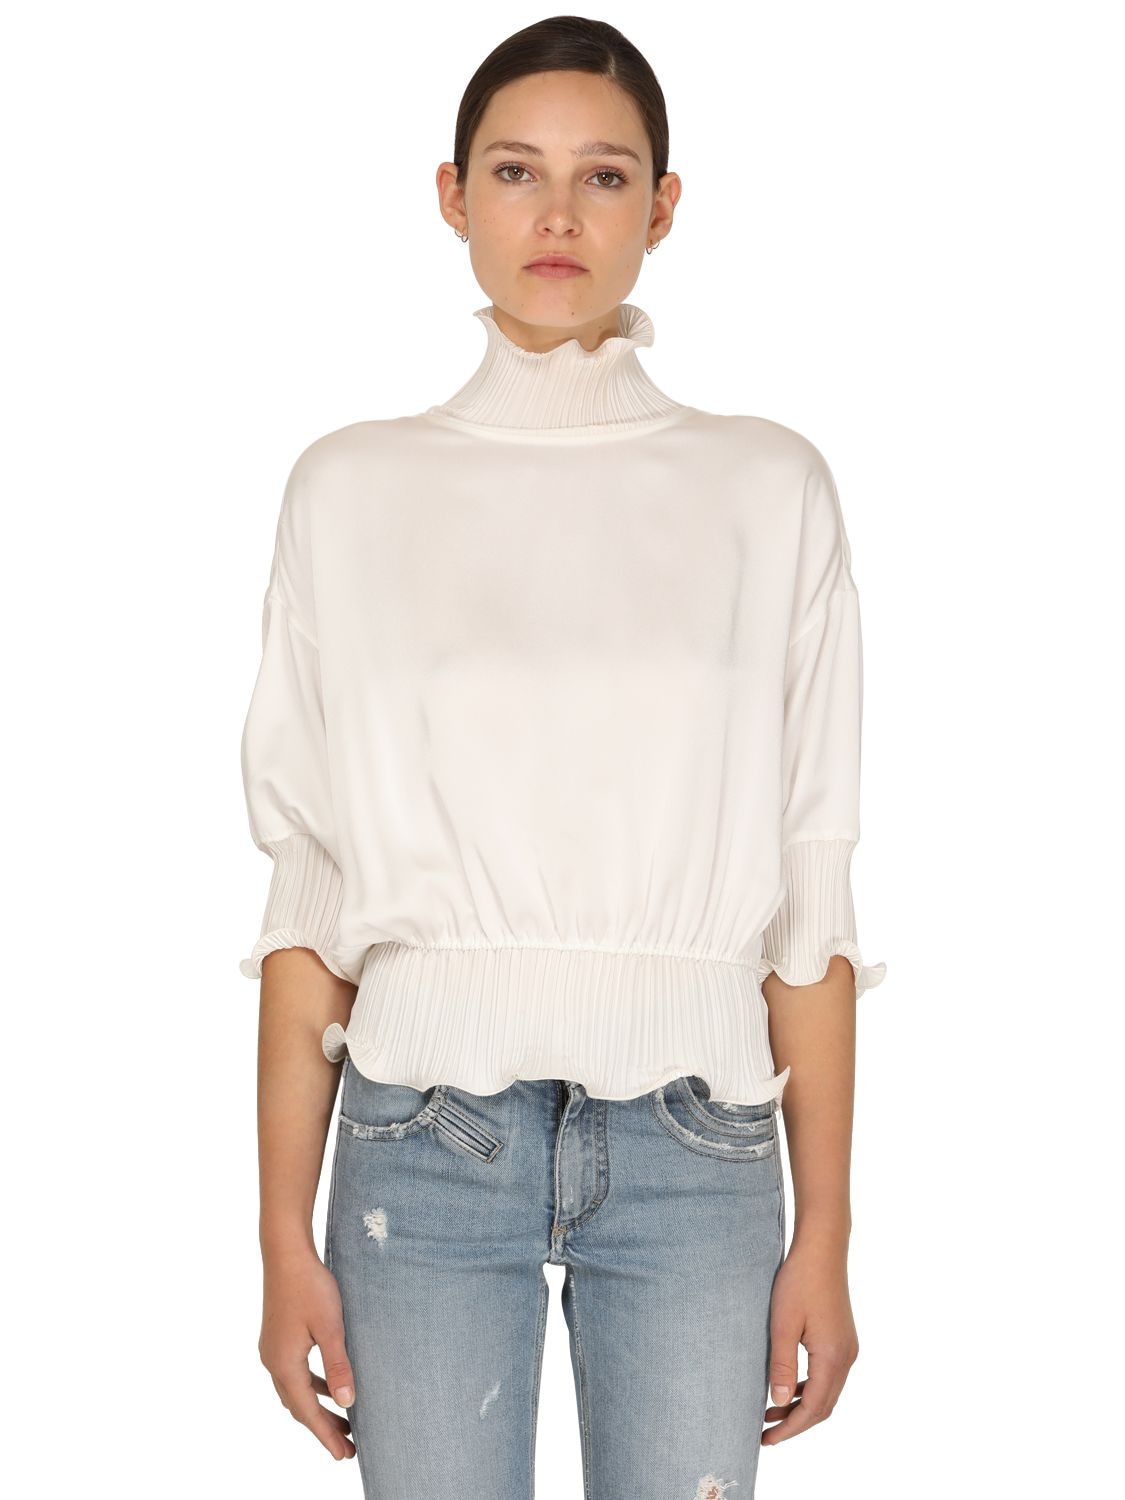 GIVENCHY SATIN CREPE TOP W/ WAVED DETAILS,71IA7M015-MTMW0